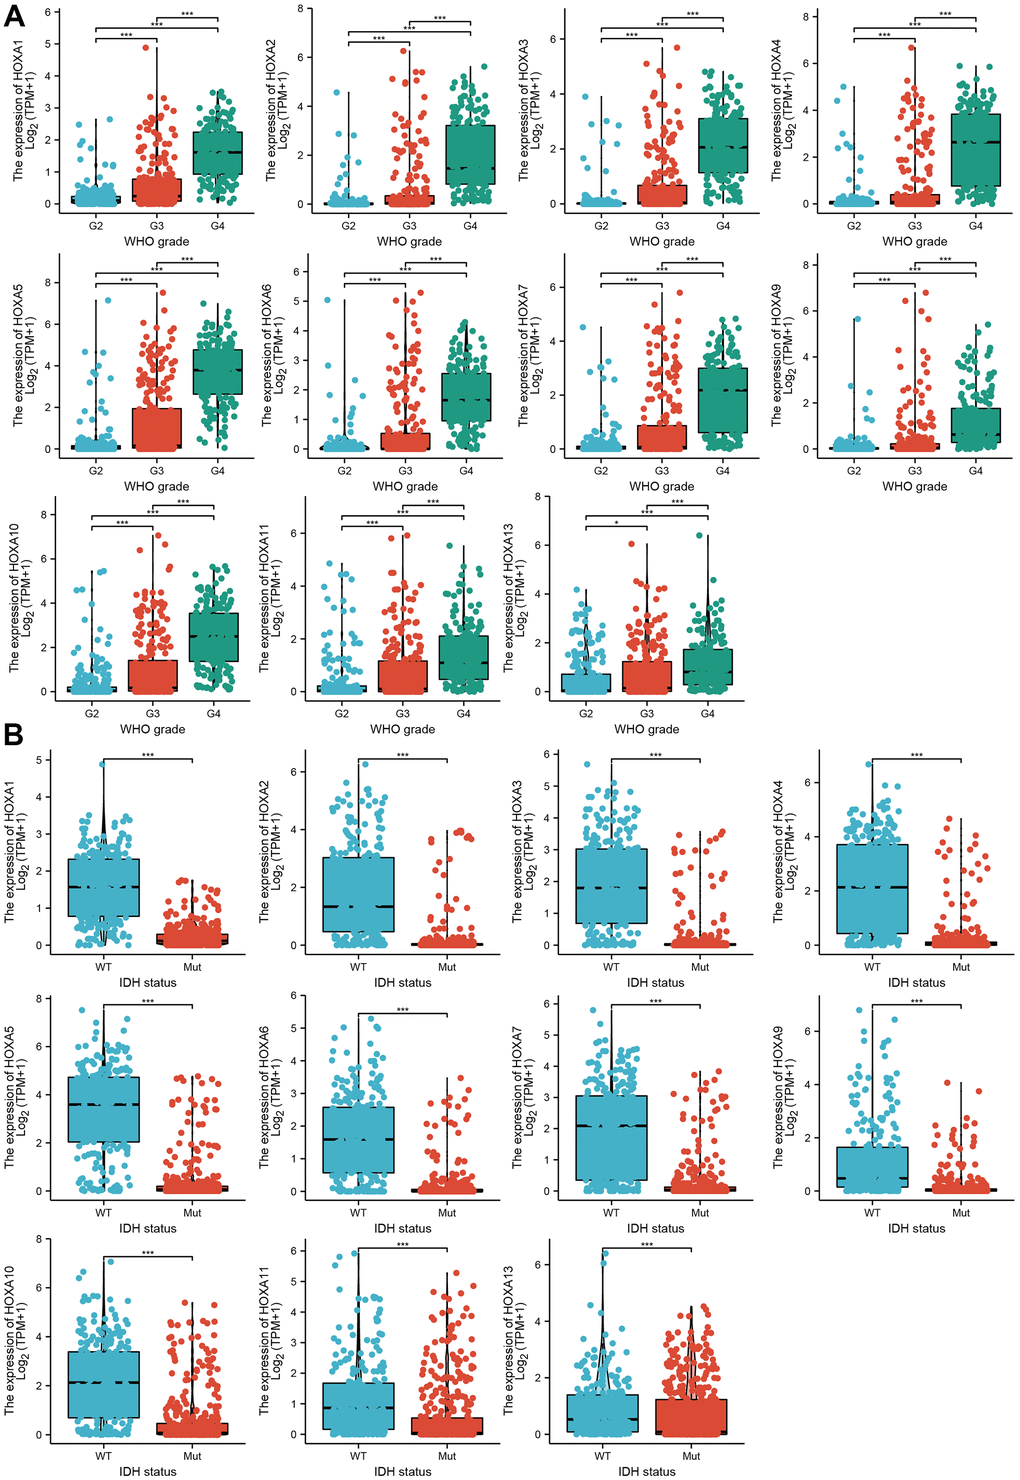 The correlation between HOXAs expression and clinical information in LGG. (A, B) The correlation between HOXAs expression and clinical features, including the higher tumor grades and IDH mutation status in glioma based on TCGA-LGG. *p 